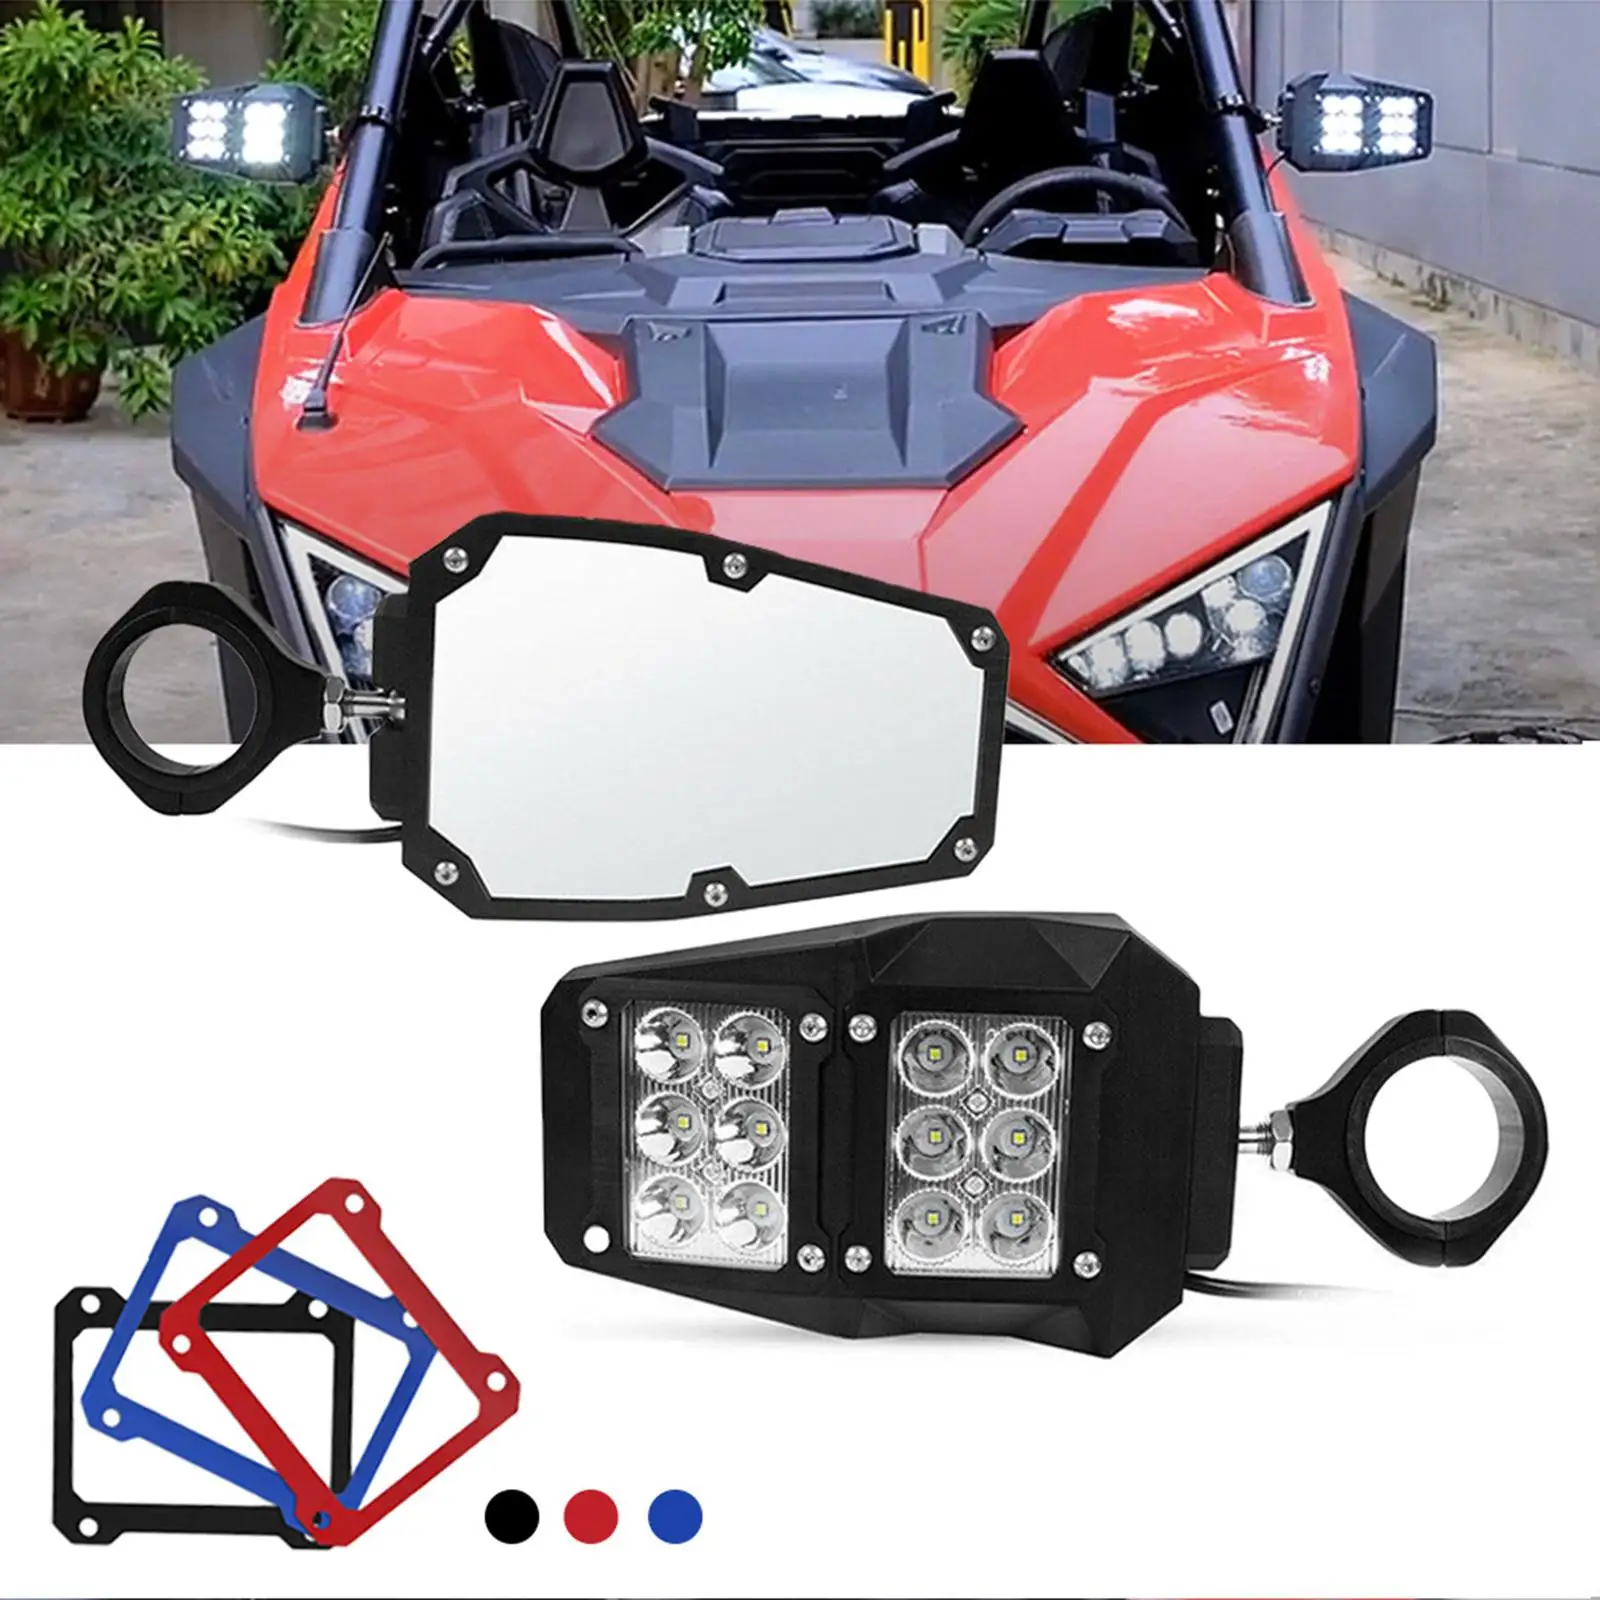 All Topography Vehicle UTV/ATV Mirror with Light Rustproof ABS Fit for Auto